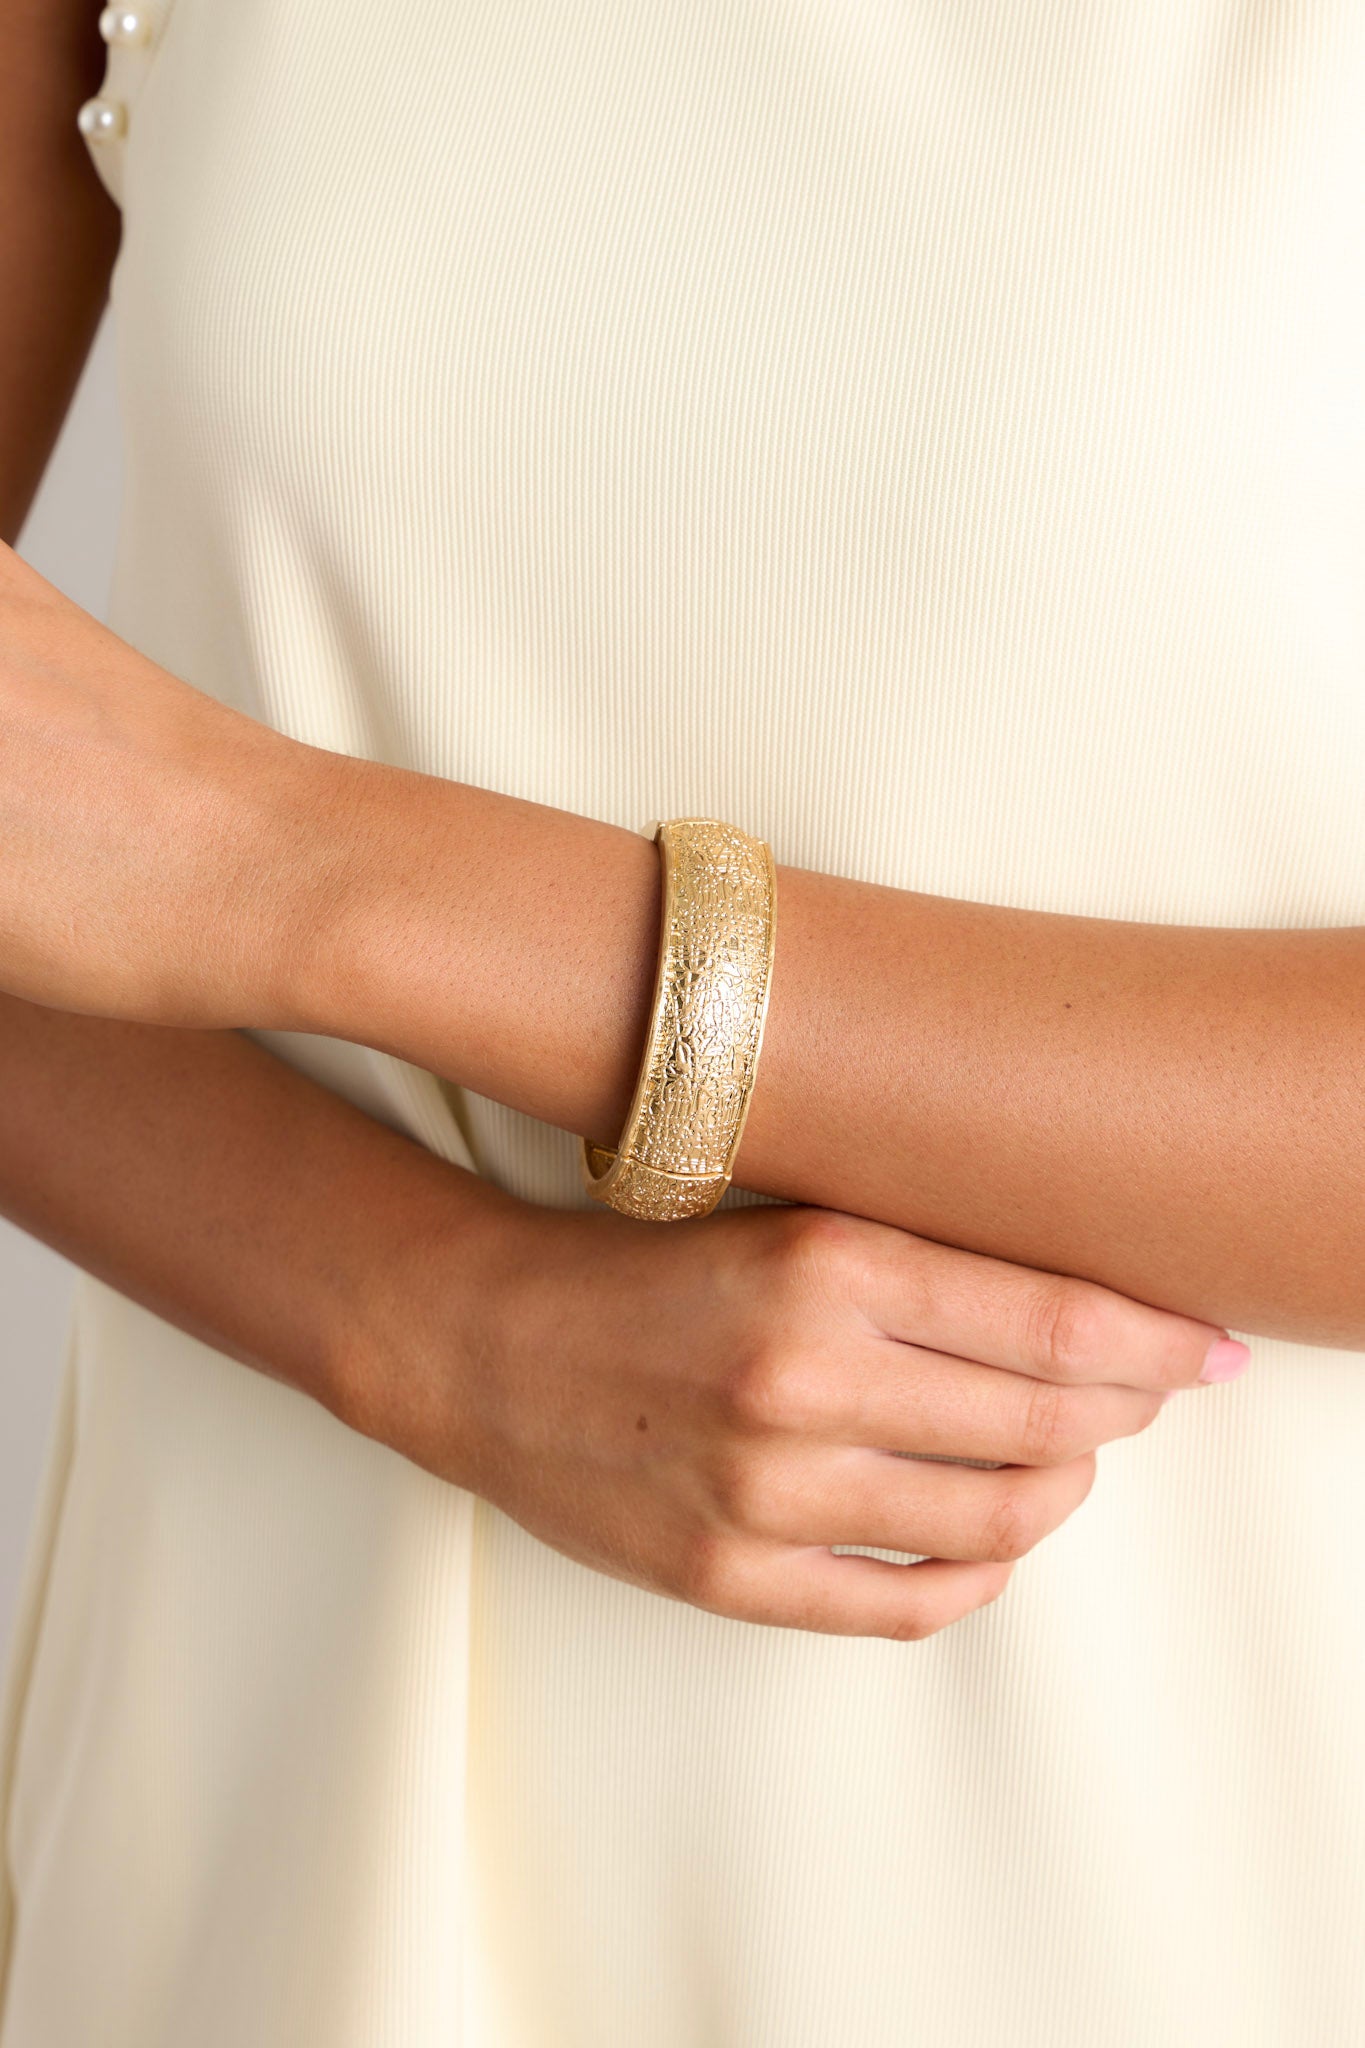 This gold bracelet features a heavily textured material, and elastic bands underneath to accommodate stretch.